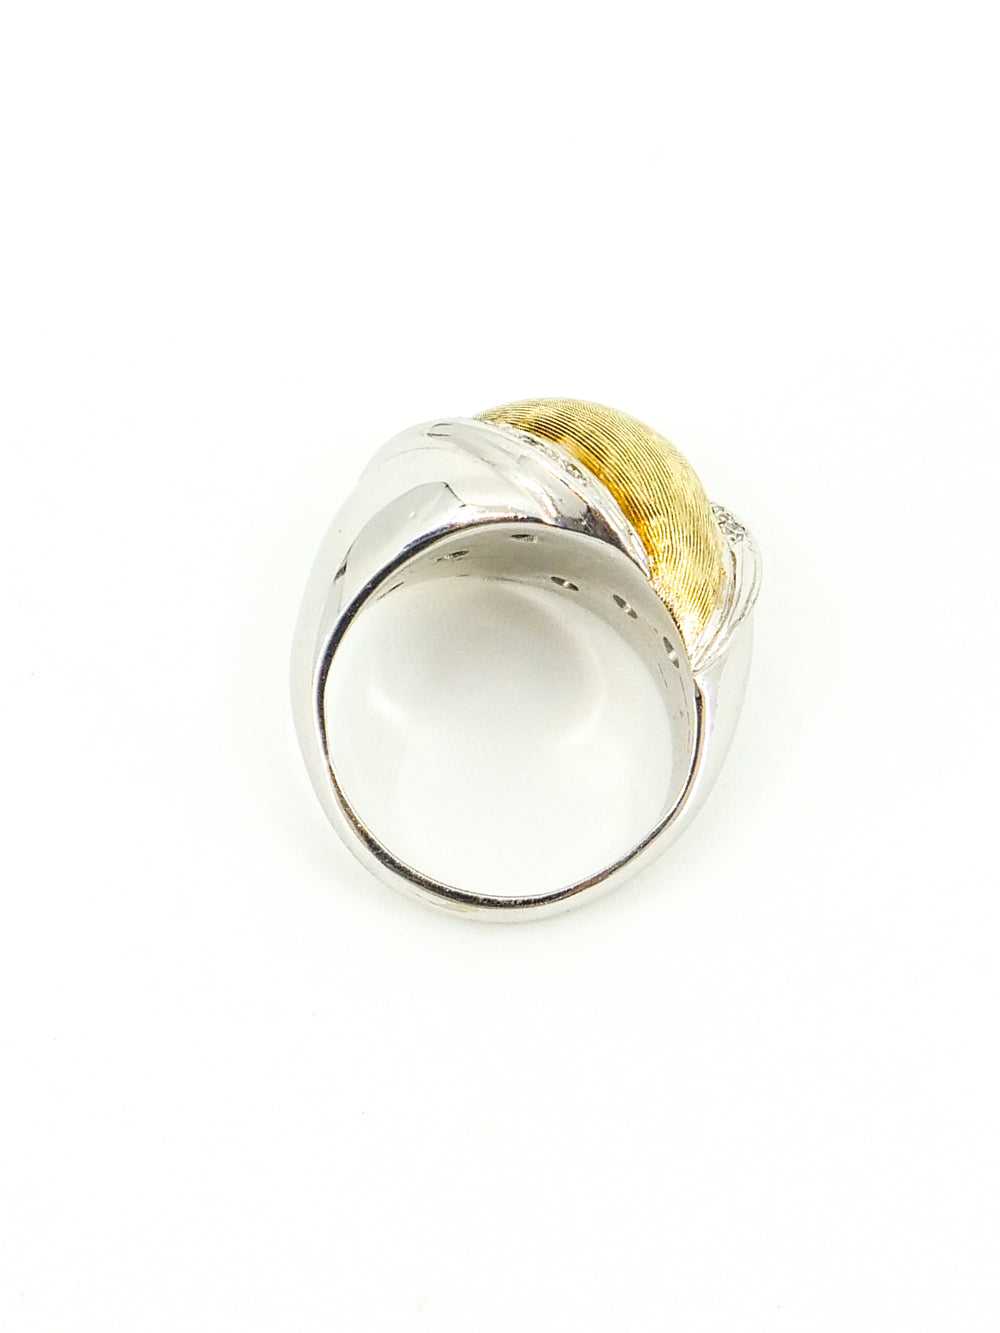 14K Yellow and White Gold Retro Style Dome Ring - image 5